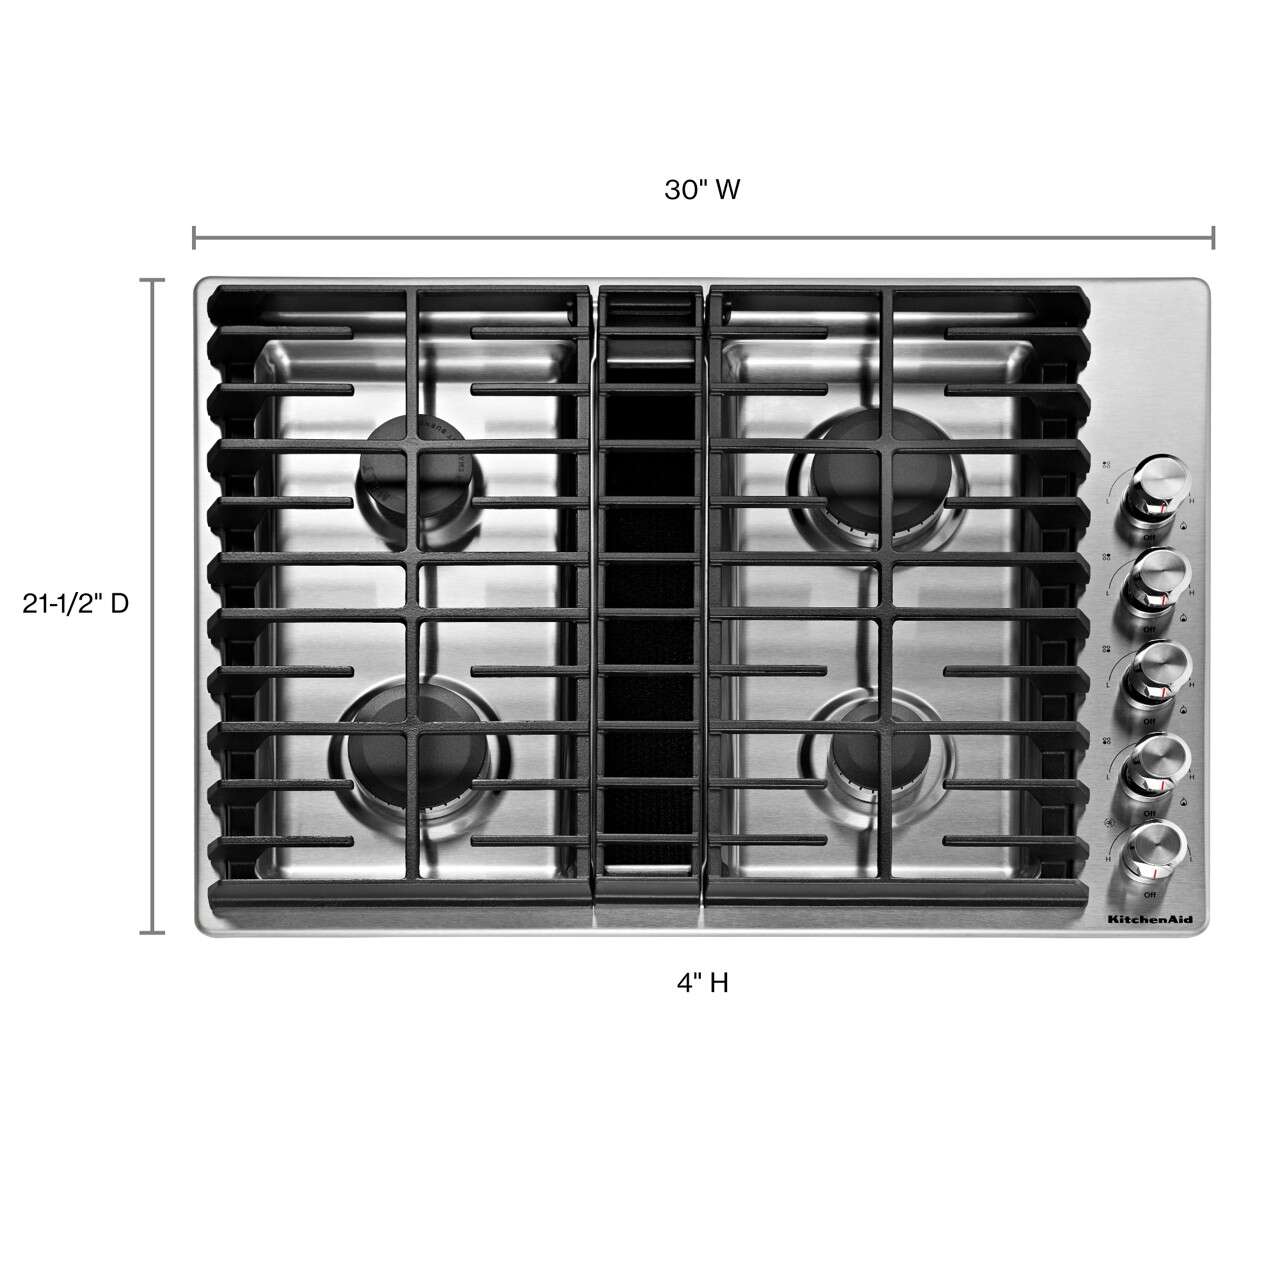 Gas Cooktop With Downdraft Exhaust